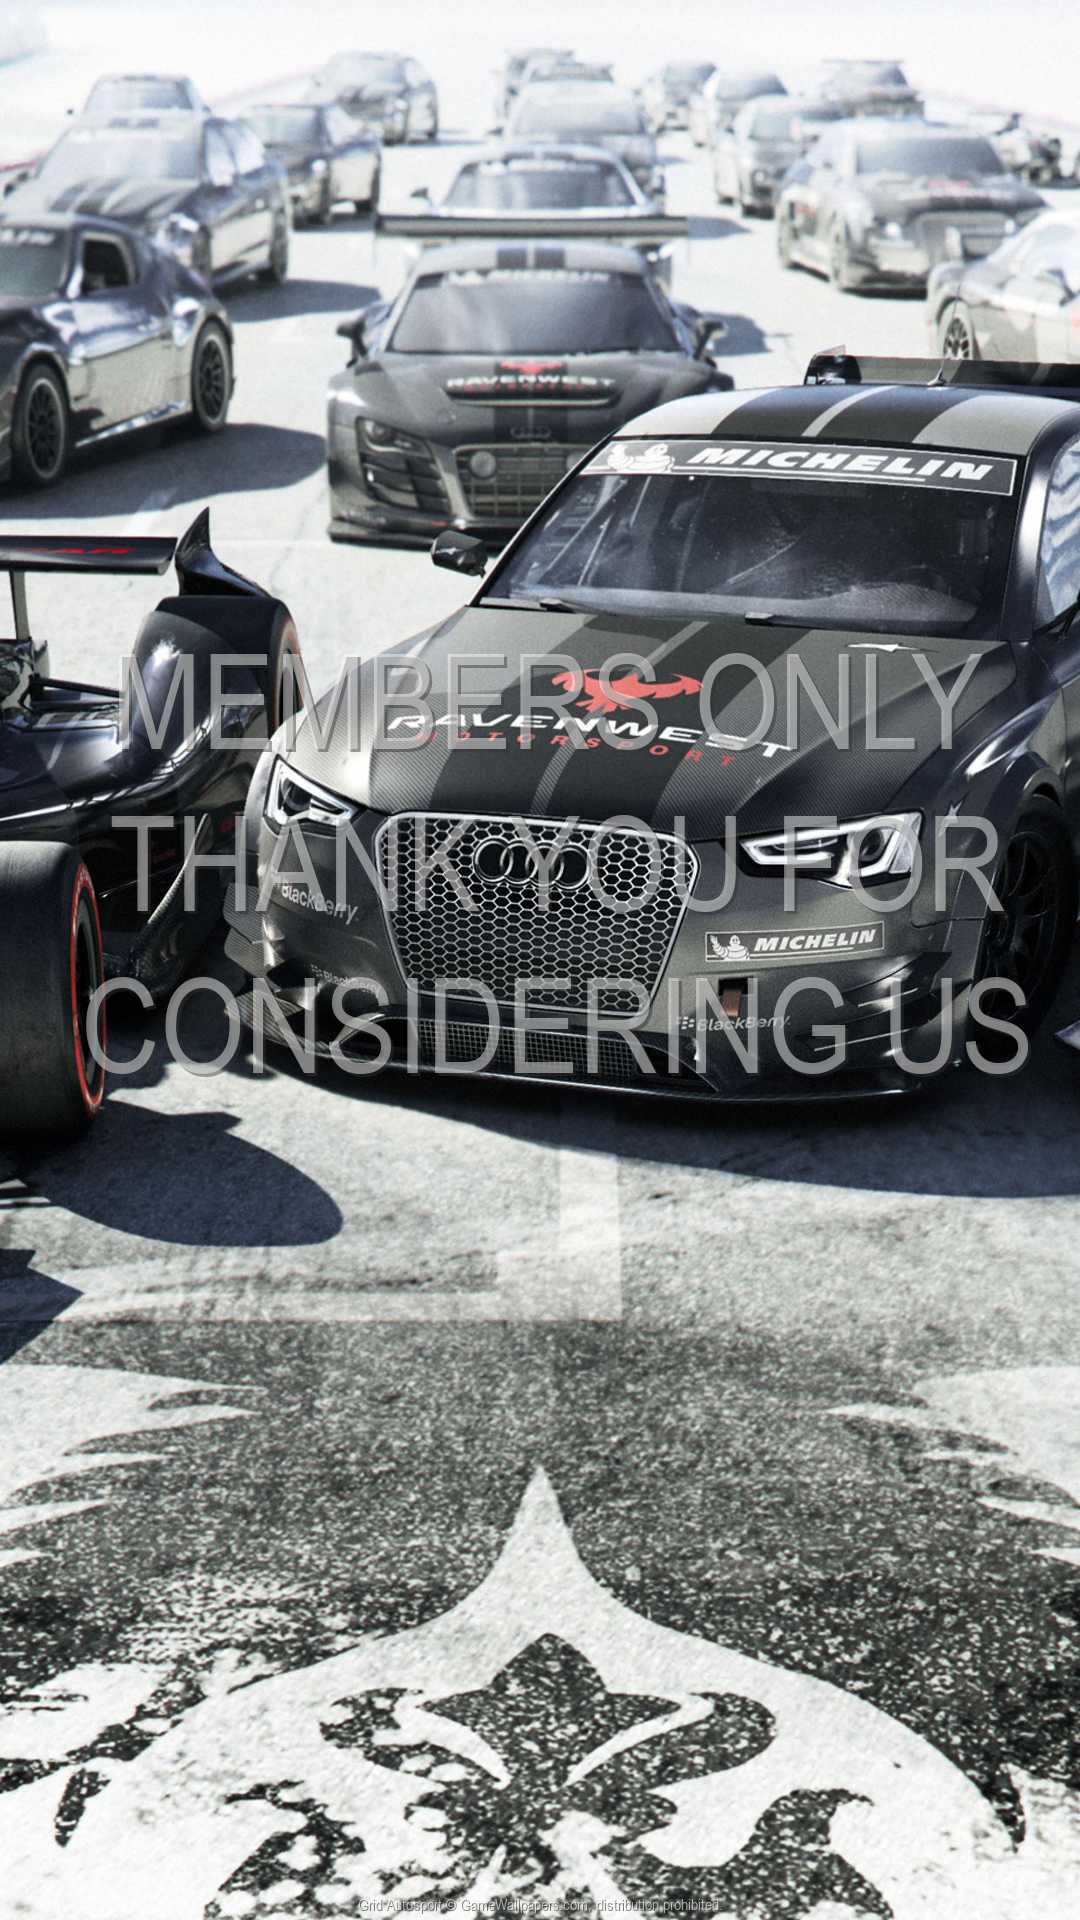 Grid Autosport 1080p%20Vertical Mobile wallpaper or background 02